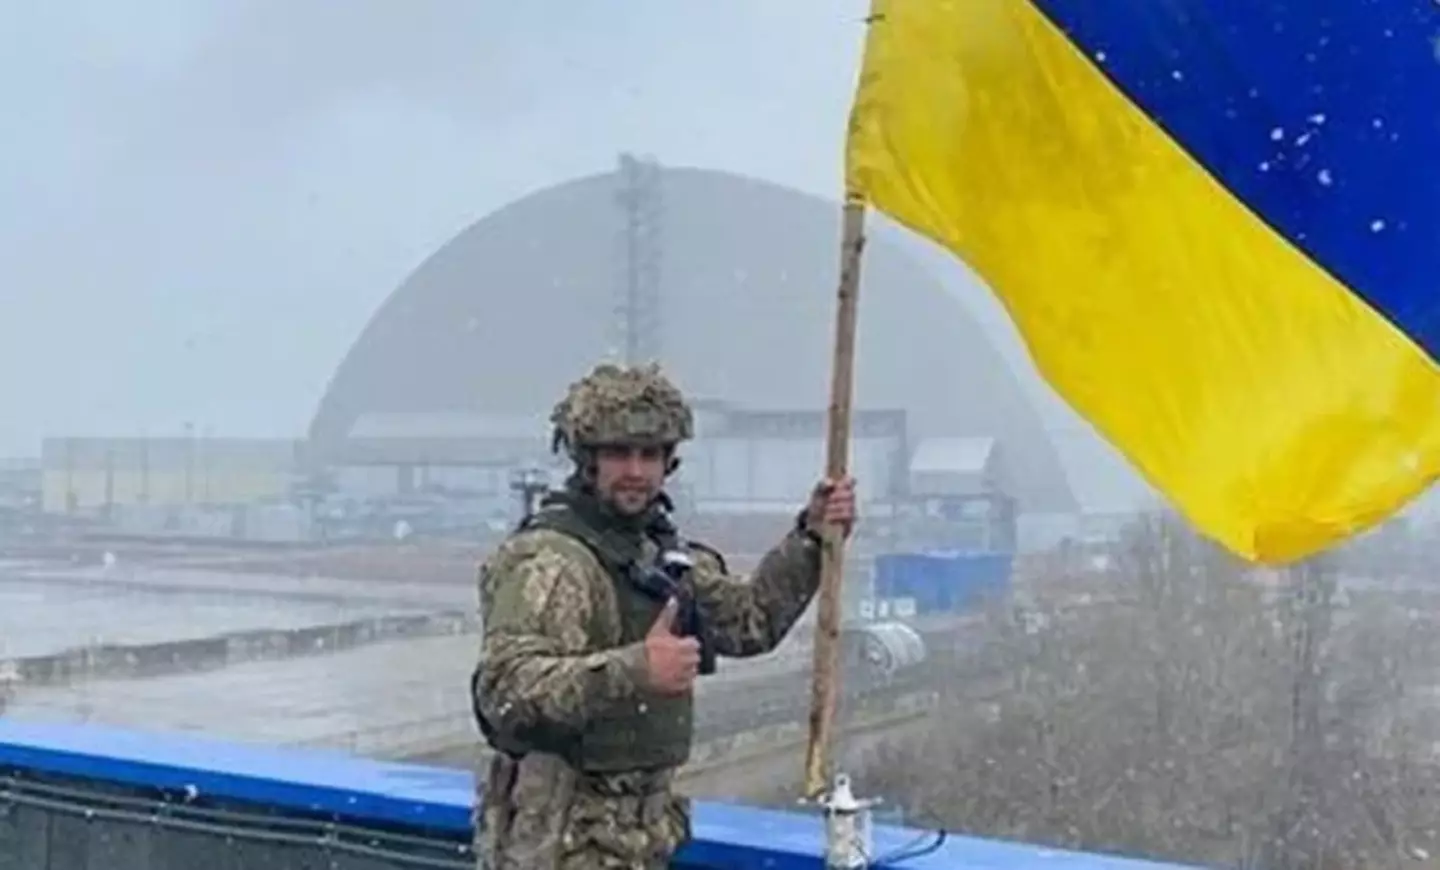 The area is now back in Ukrainian control.